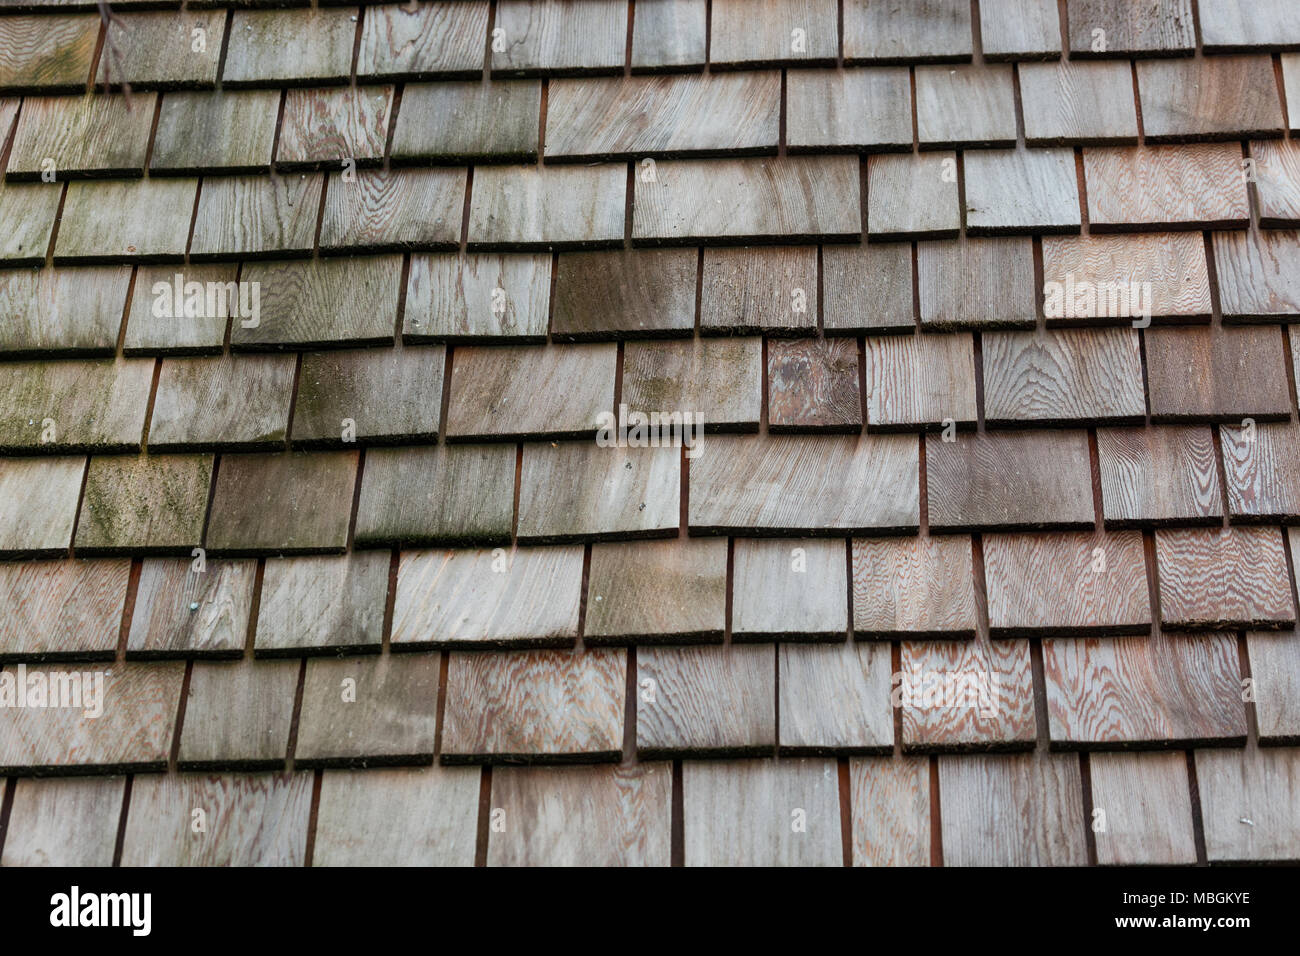 Wood Shingle Tiles On A Roof for background Stock Photo